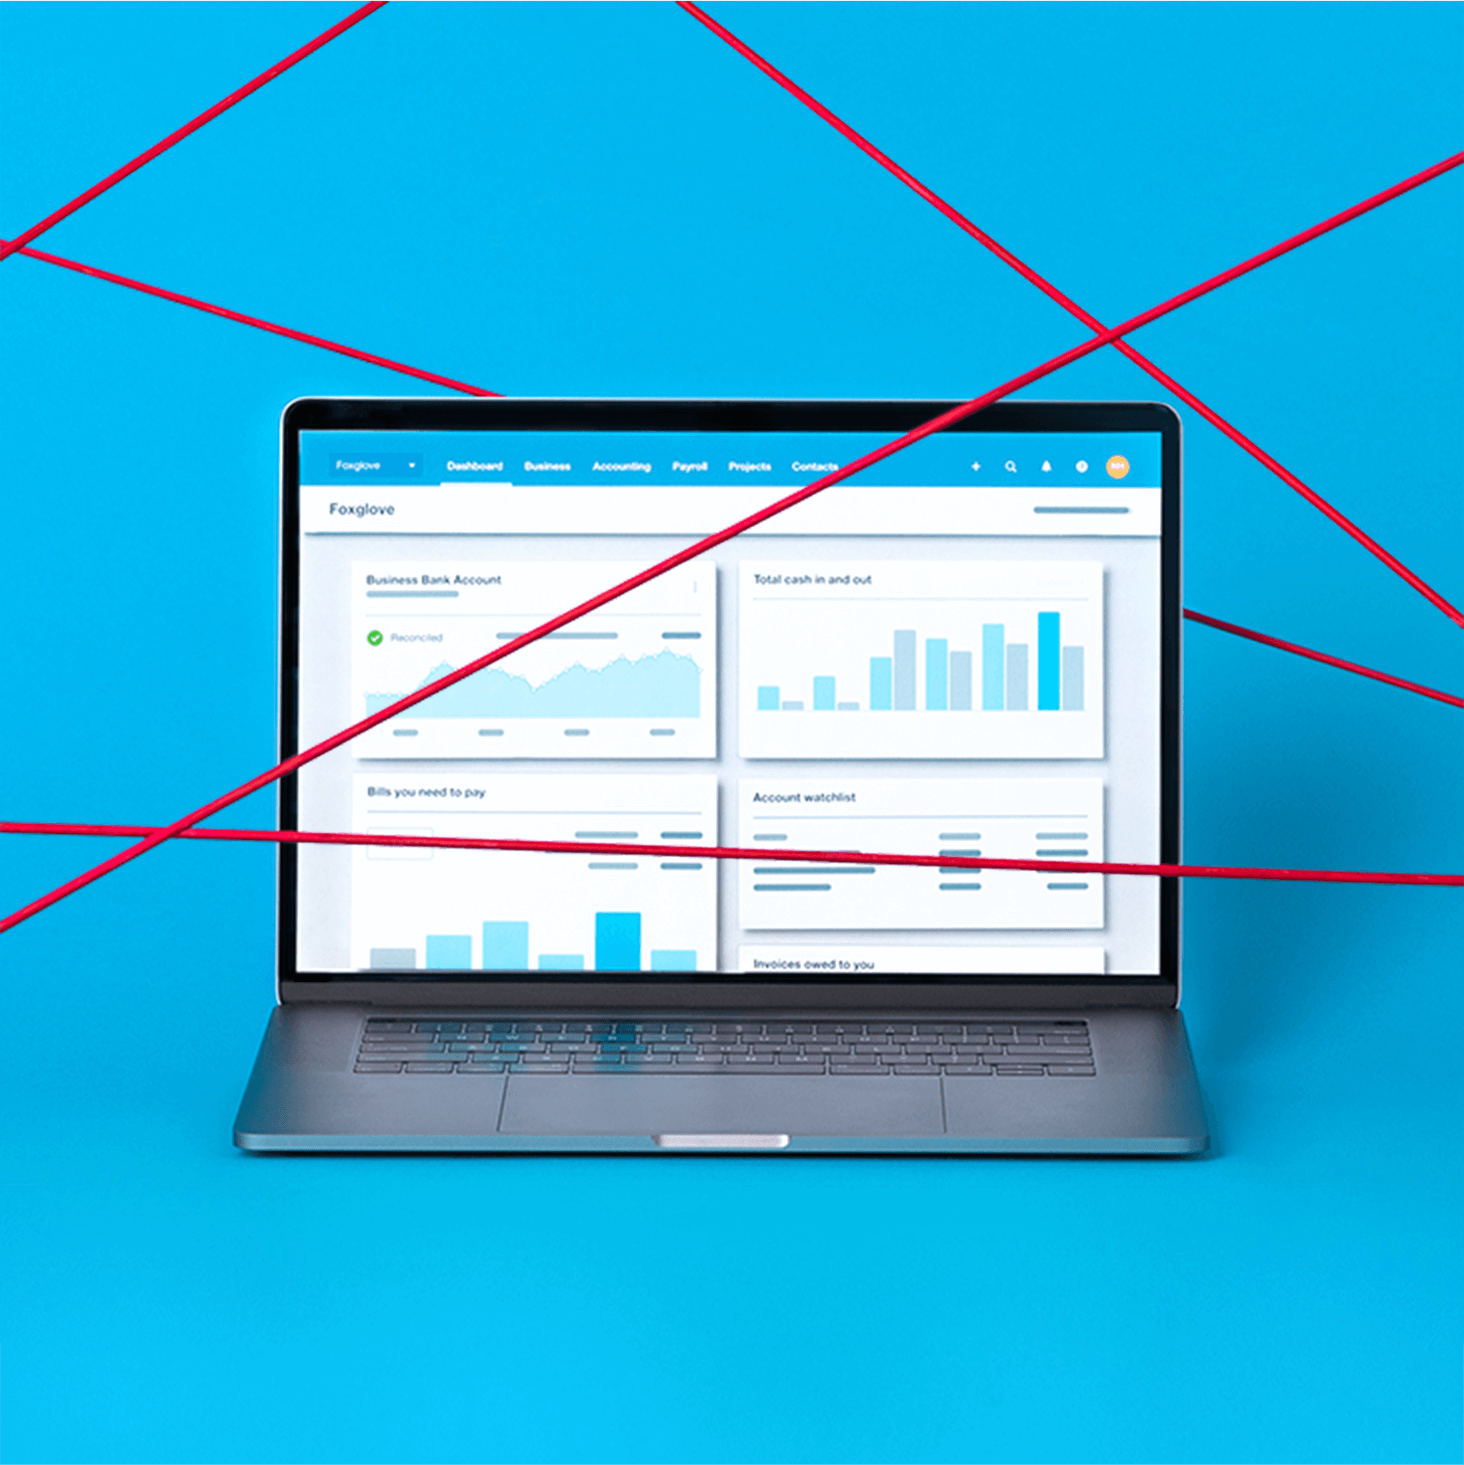 A laptop displaying business data in Xero is criss-crossed with red wire, indicating it’s protected from unauthorised access.